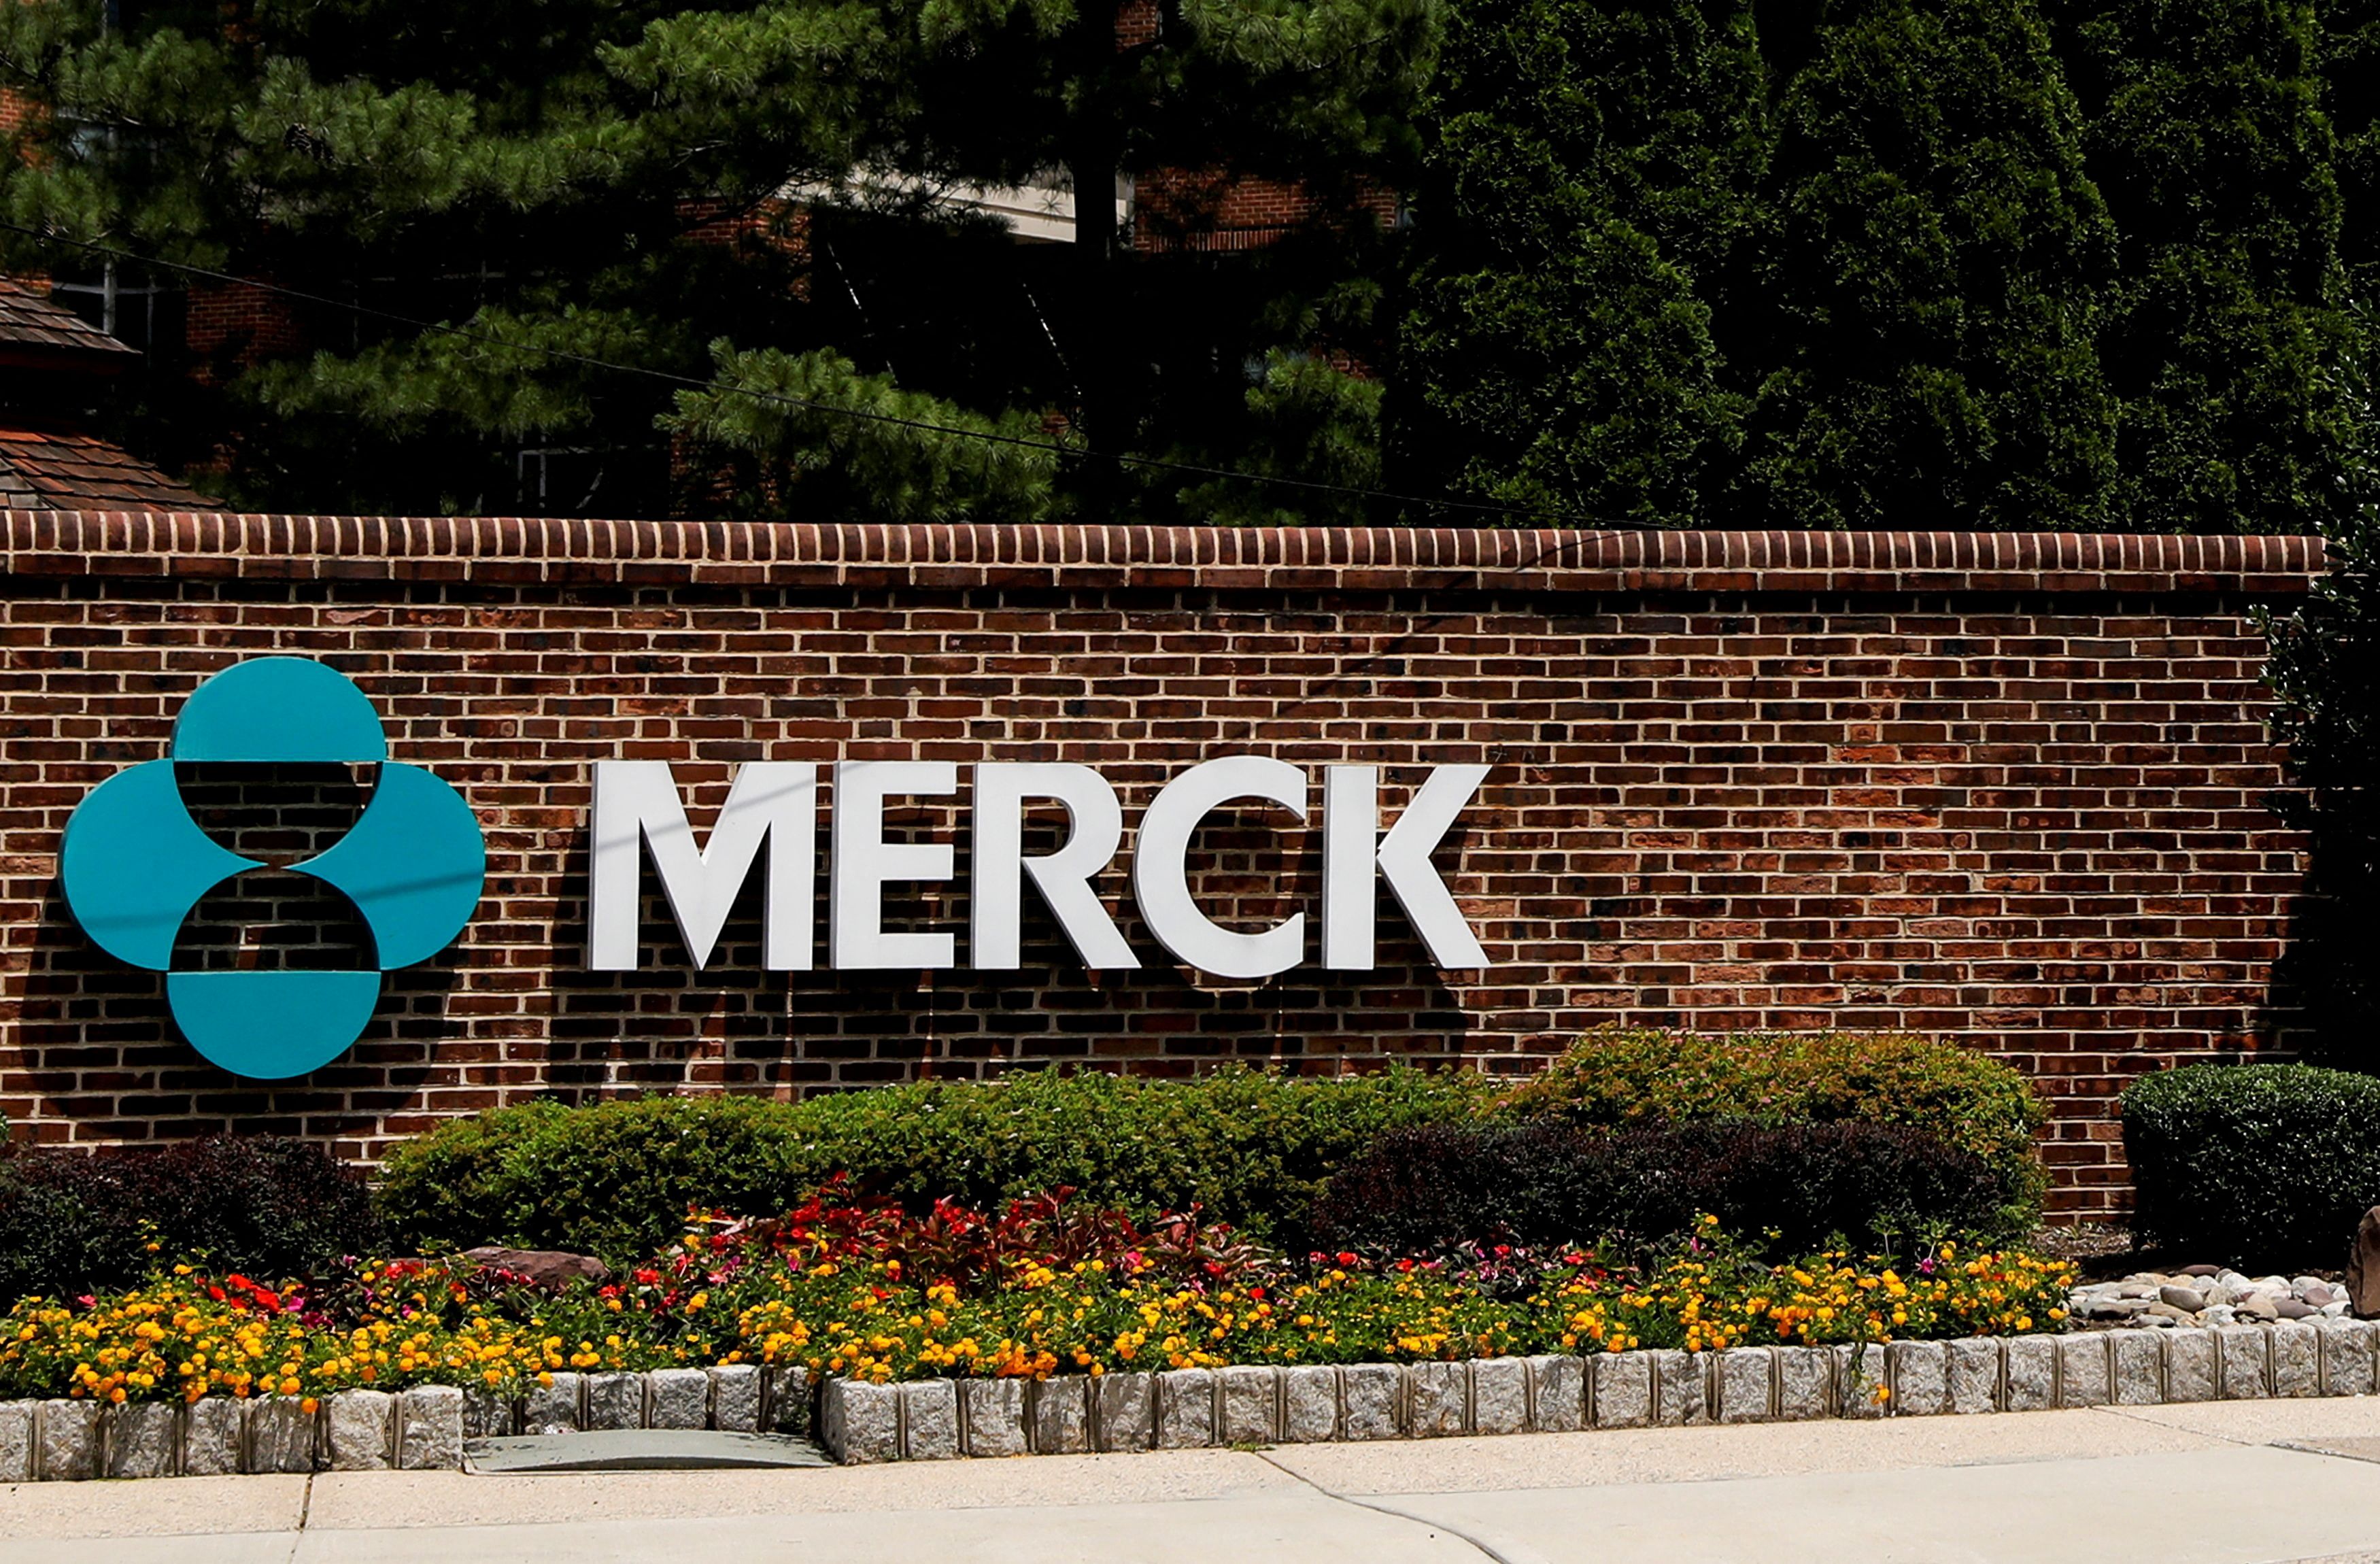 The Merck logo is seen at a gate to the Merck & Co campus in Rahway, New Jersey